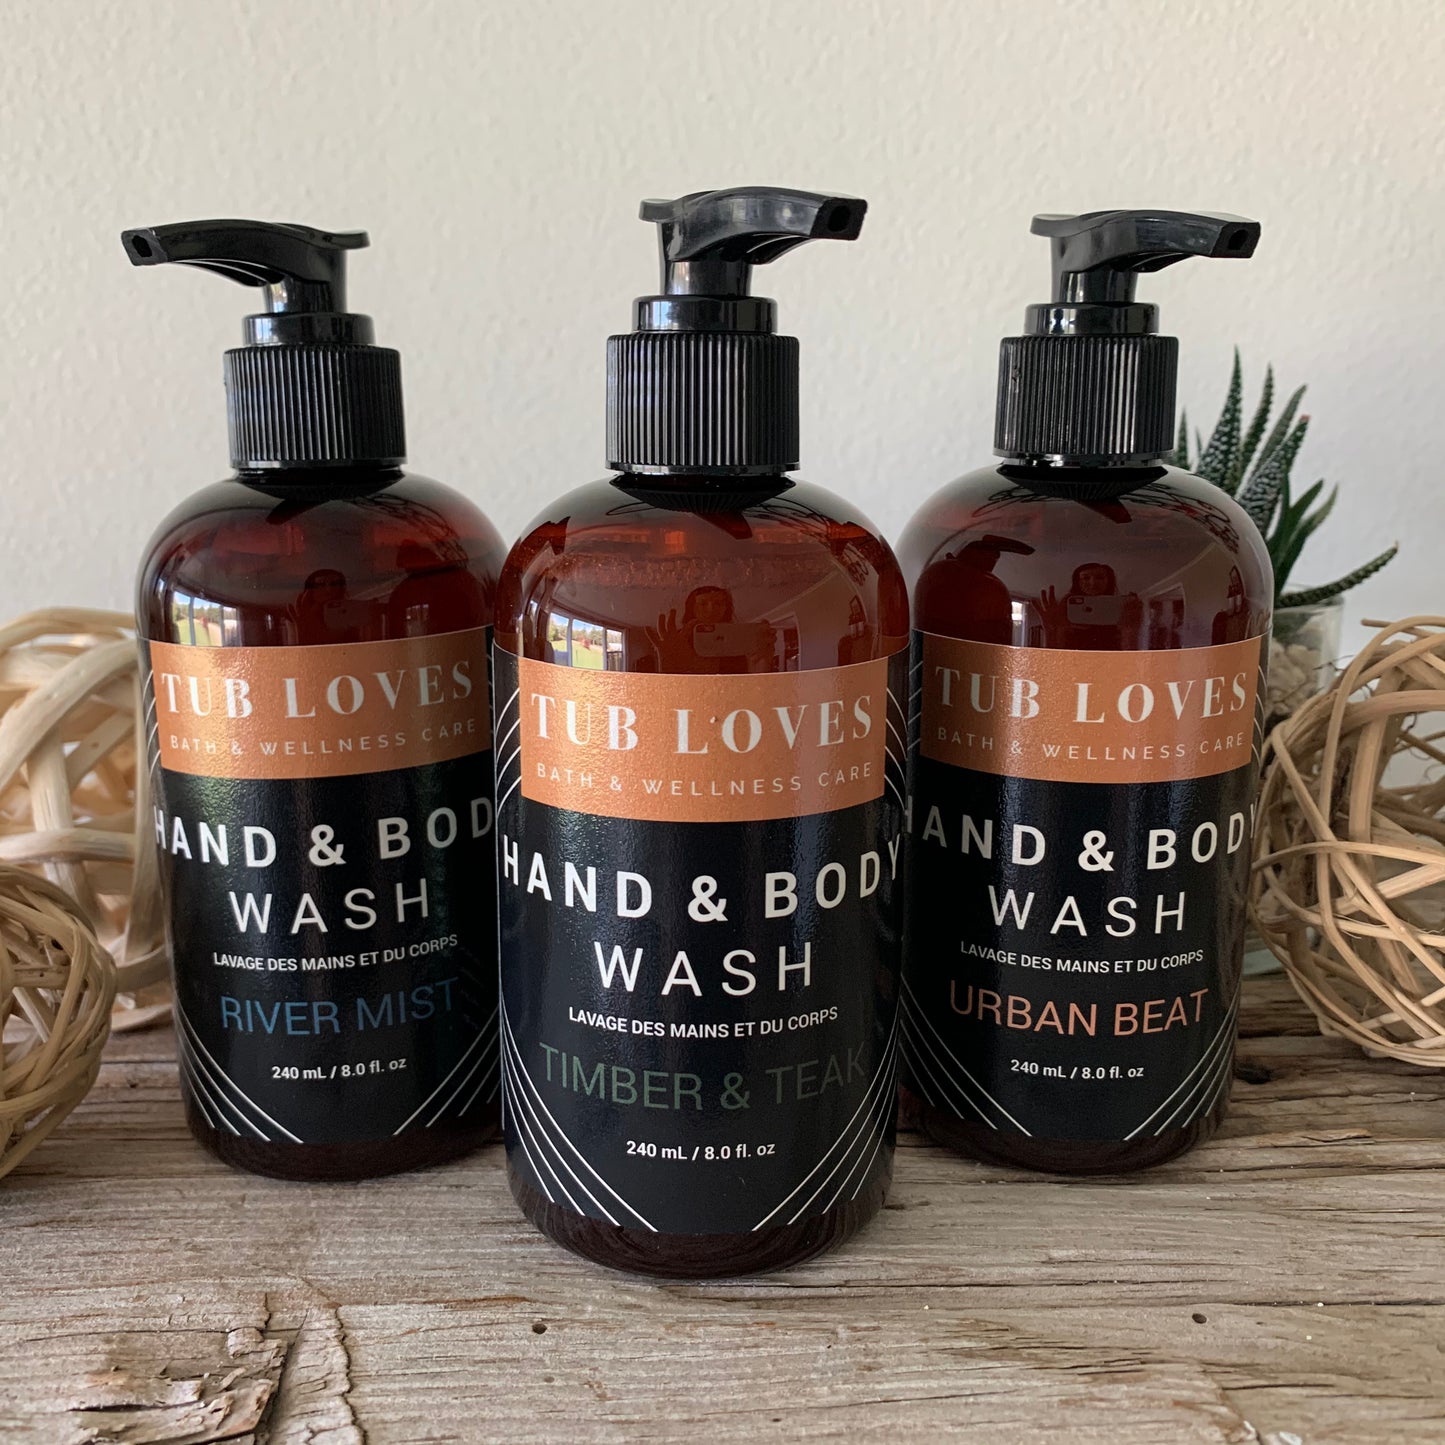 TIMBER & TEAK - HAND AND BODY WASH - Tub Loves